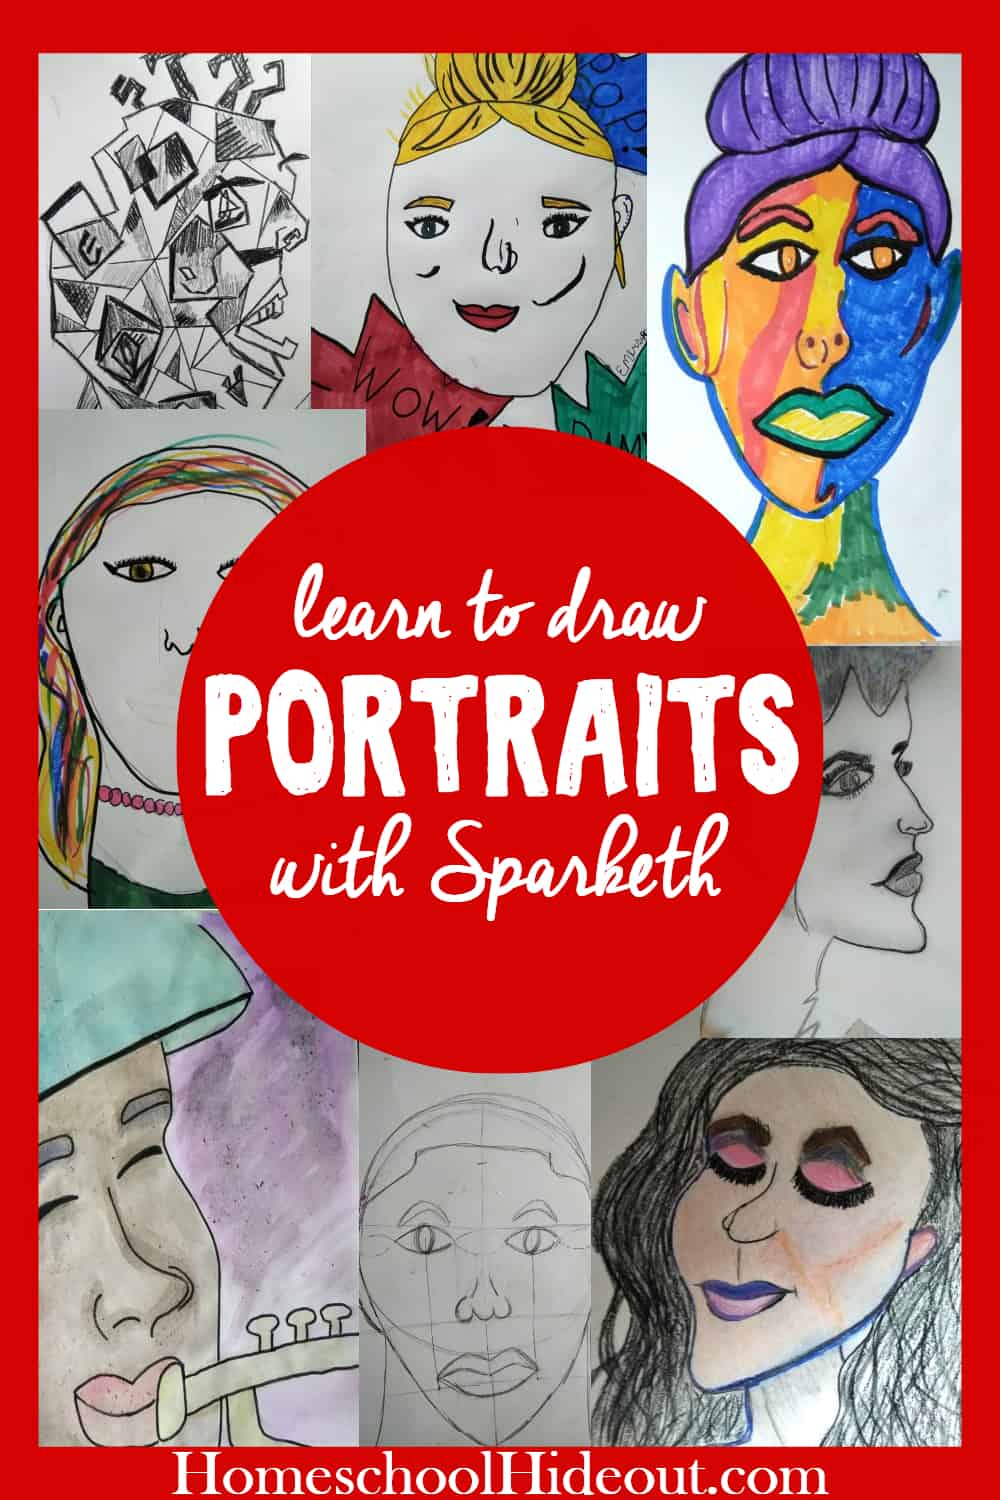 Want to learn to draw portraits like a pro? The quick and easy #artlessons are perfect for budding artist, young and old! #artists #portraits #drawing #watercolor #homeschool #homeschooling #homeschoolart